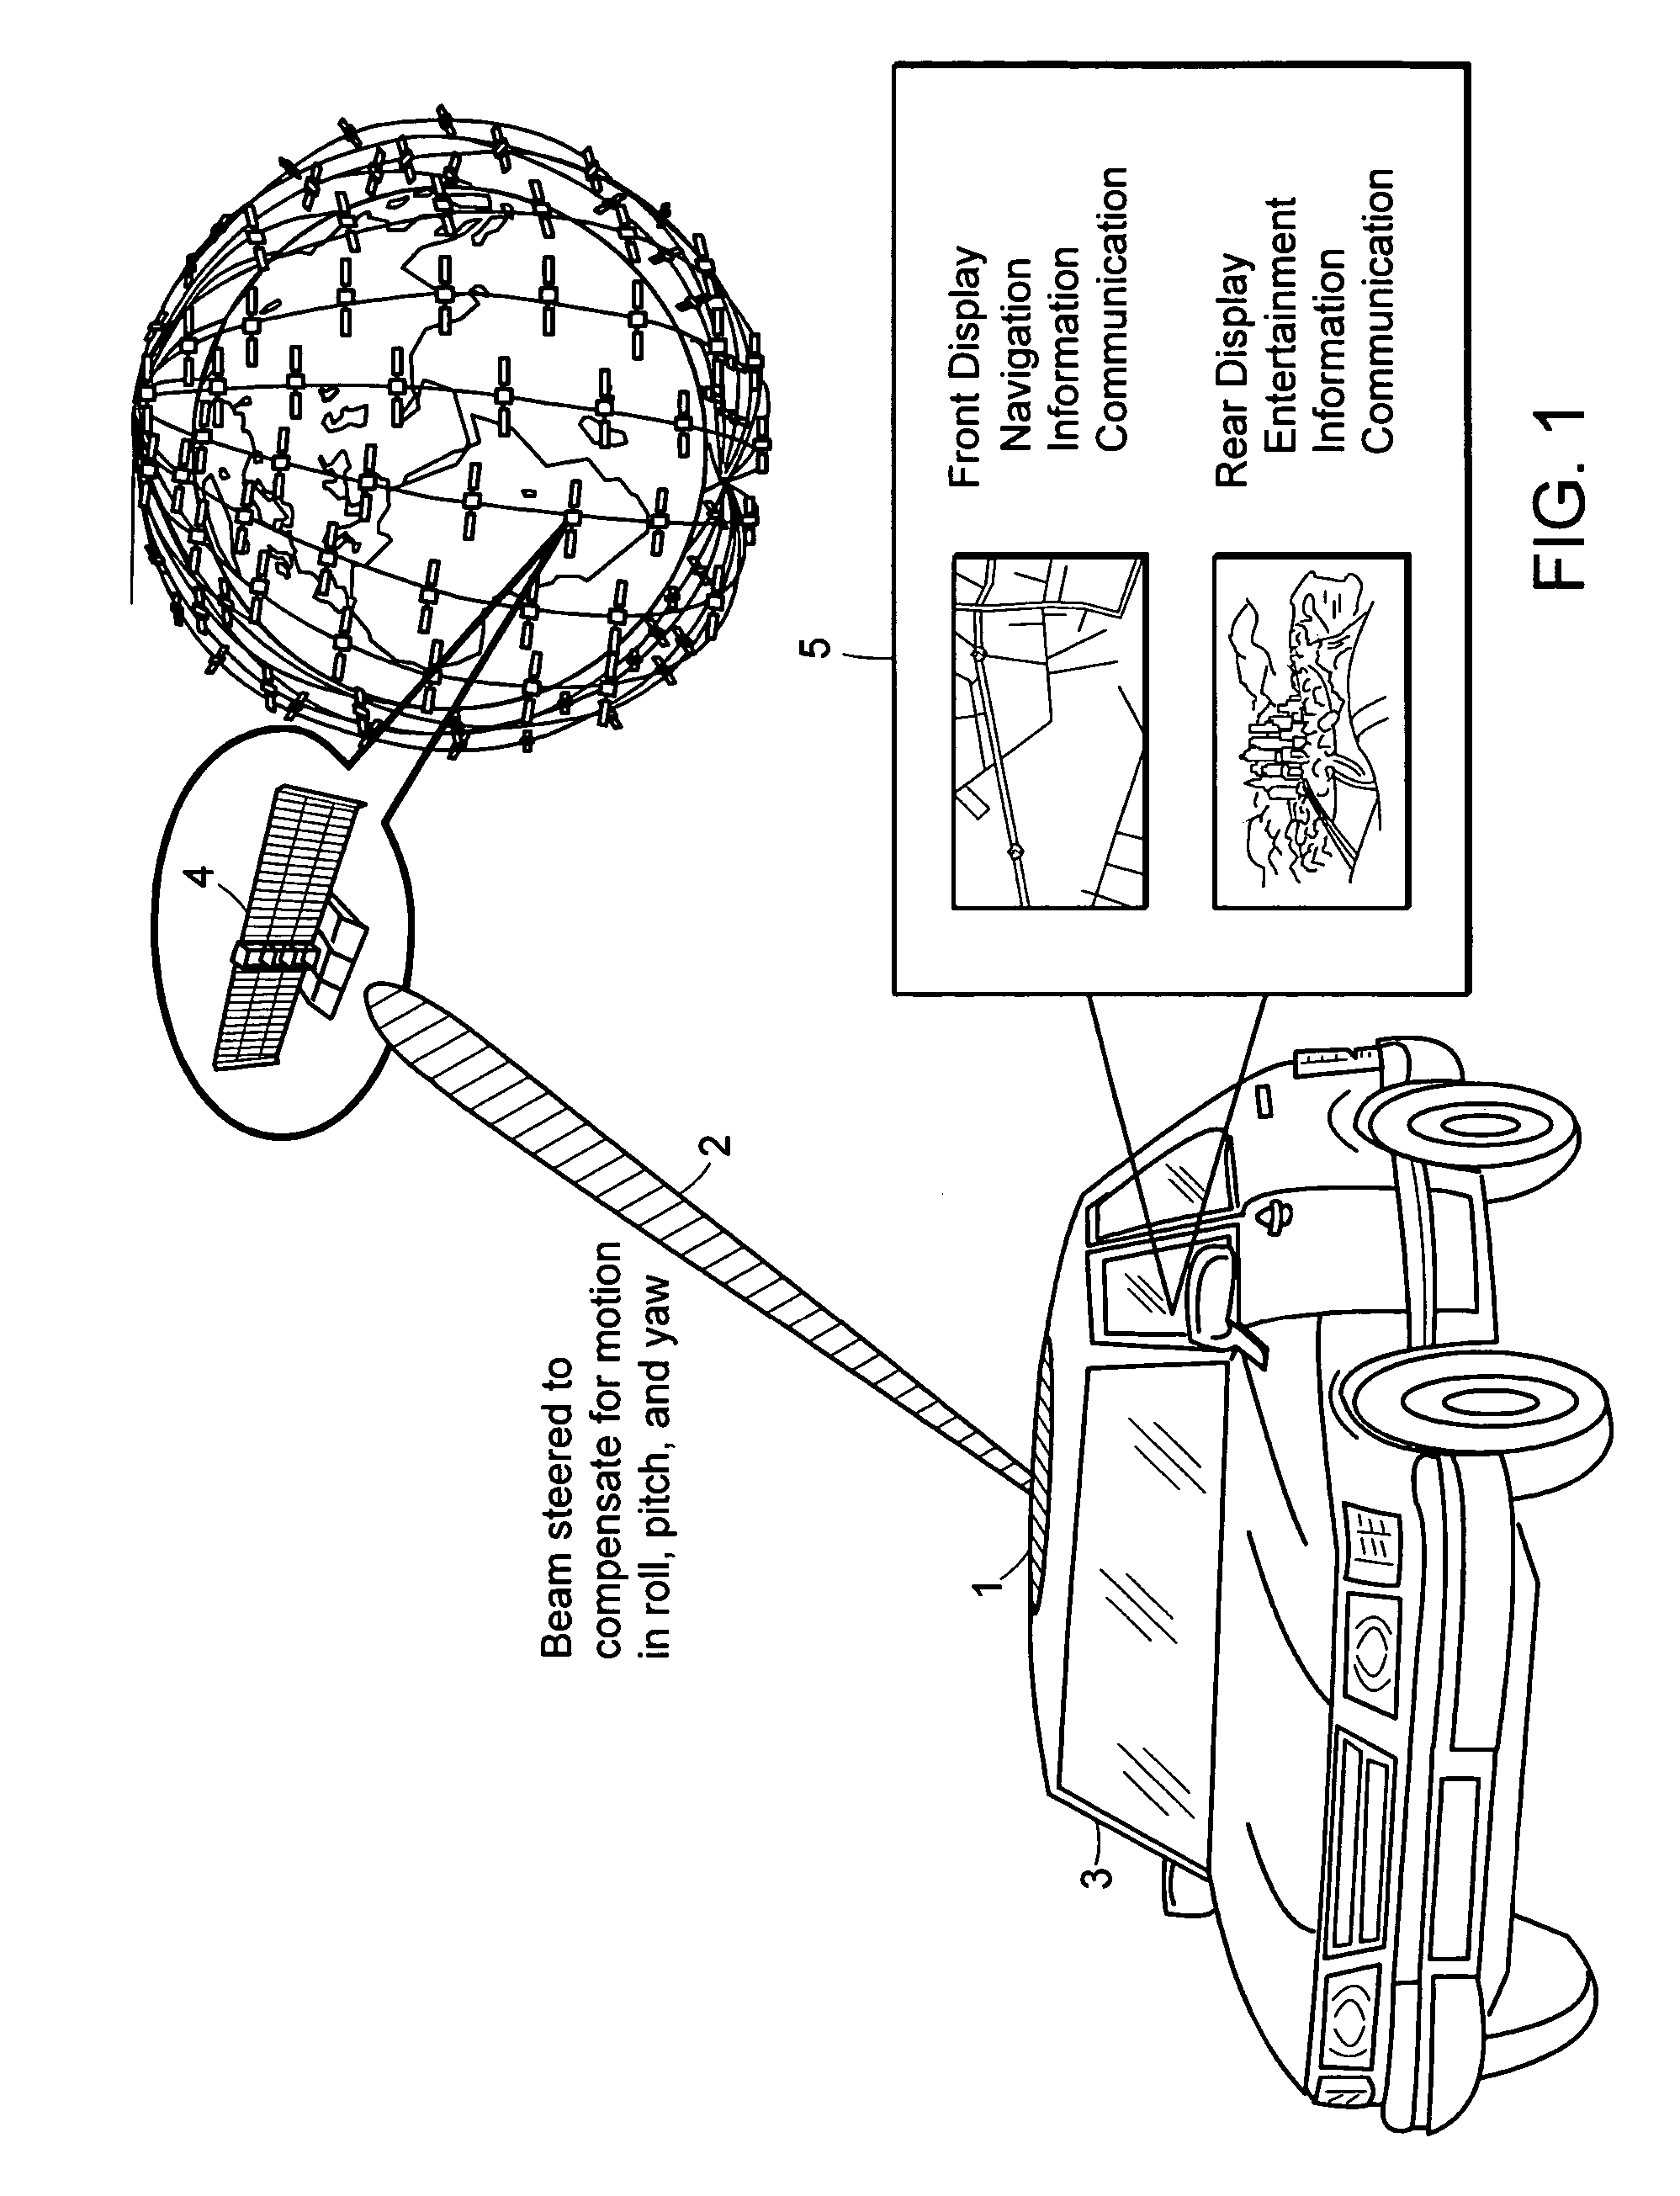 Attitude measurement using a GPS receiver with two closely-spaced antennas